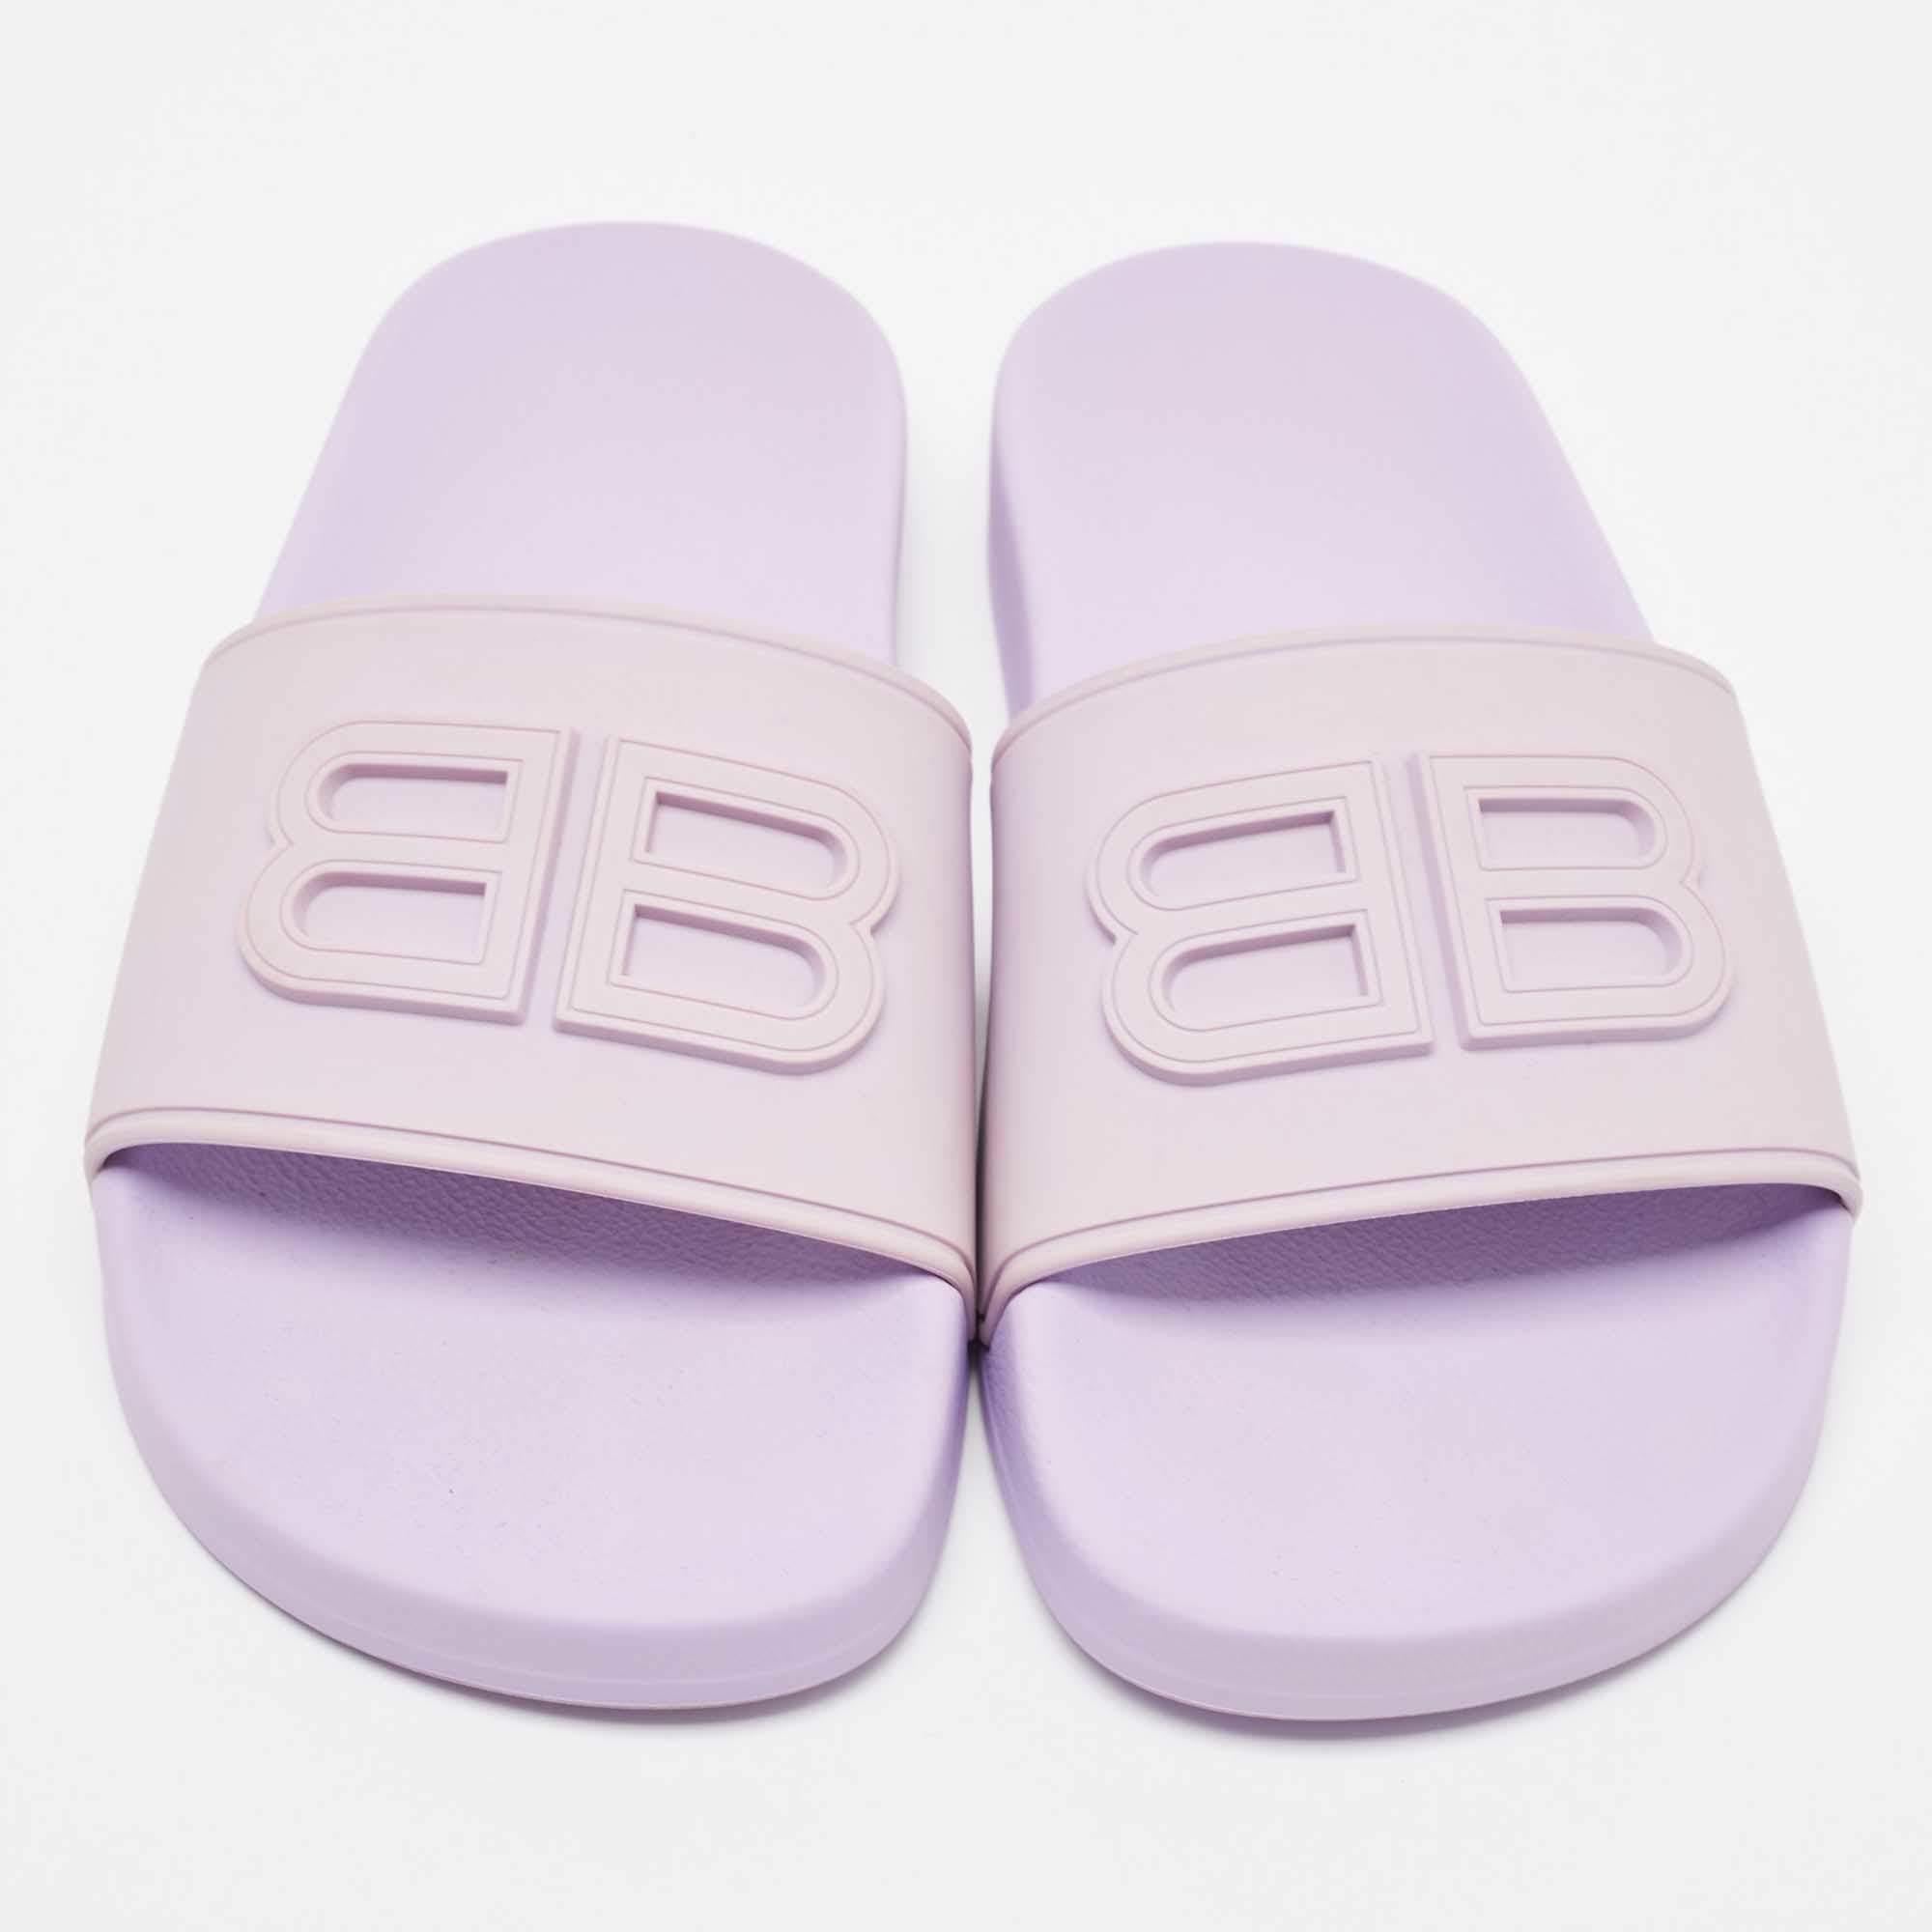 Balenciaga's rubber slides for women have the BB branding on the uppers. They're perfect for the beach, vacation days, or everyday use.

